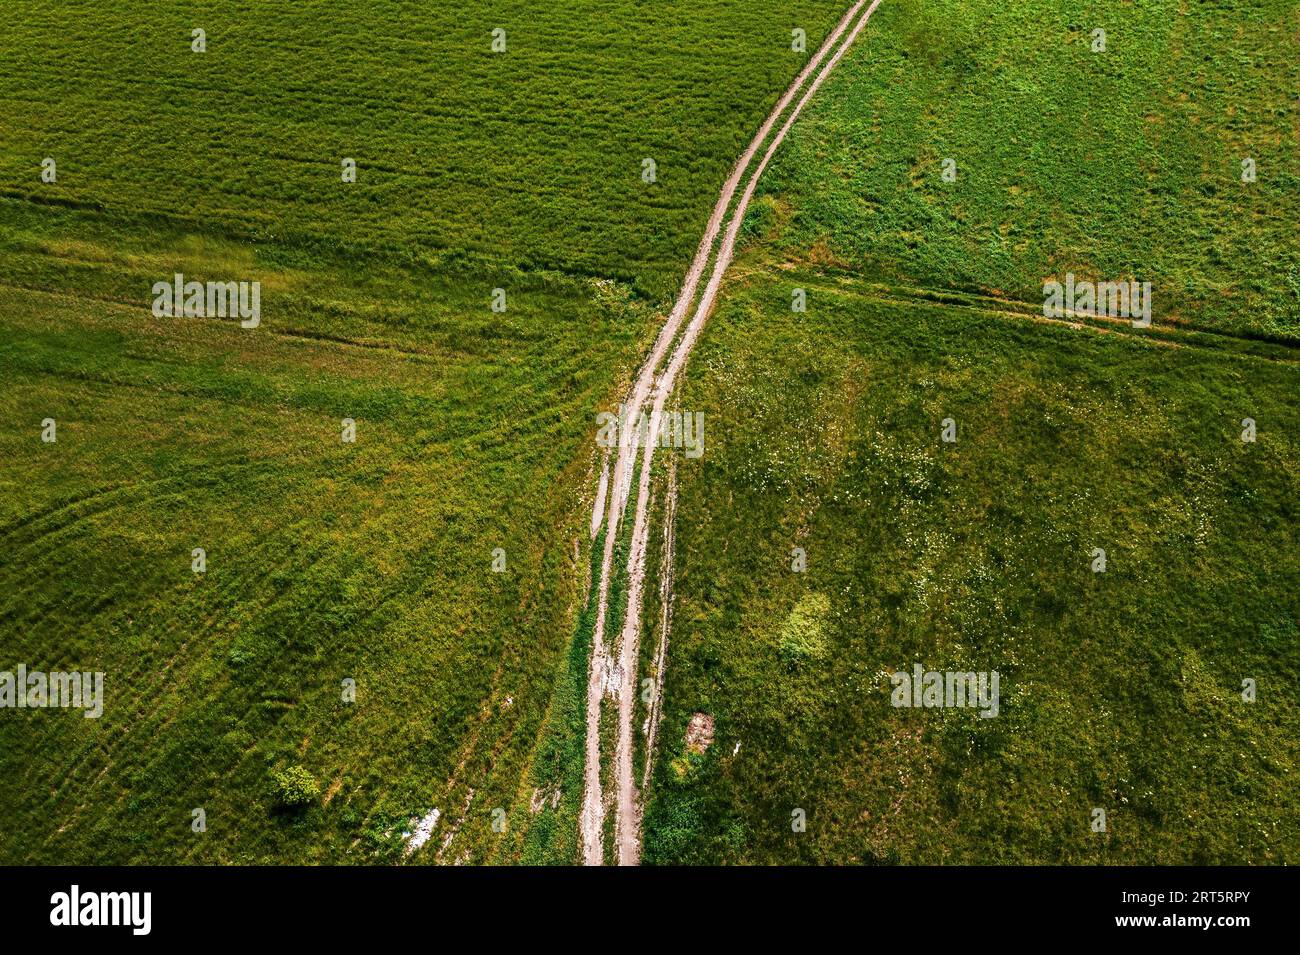 Aerial shot of curved dirt road through green grassy meadow, drone pov high angle view Stock Photo